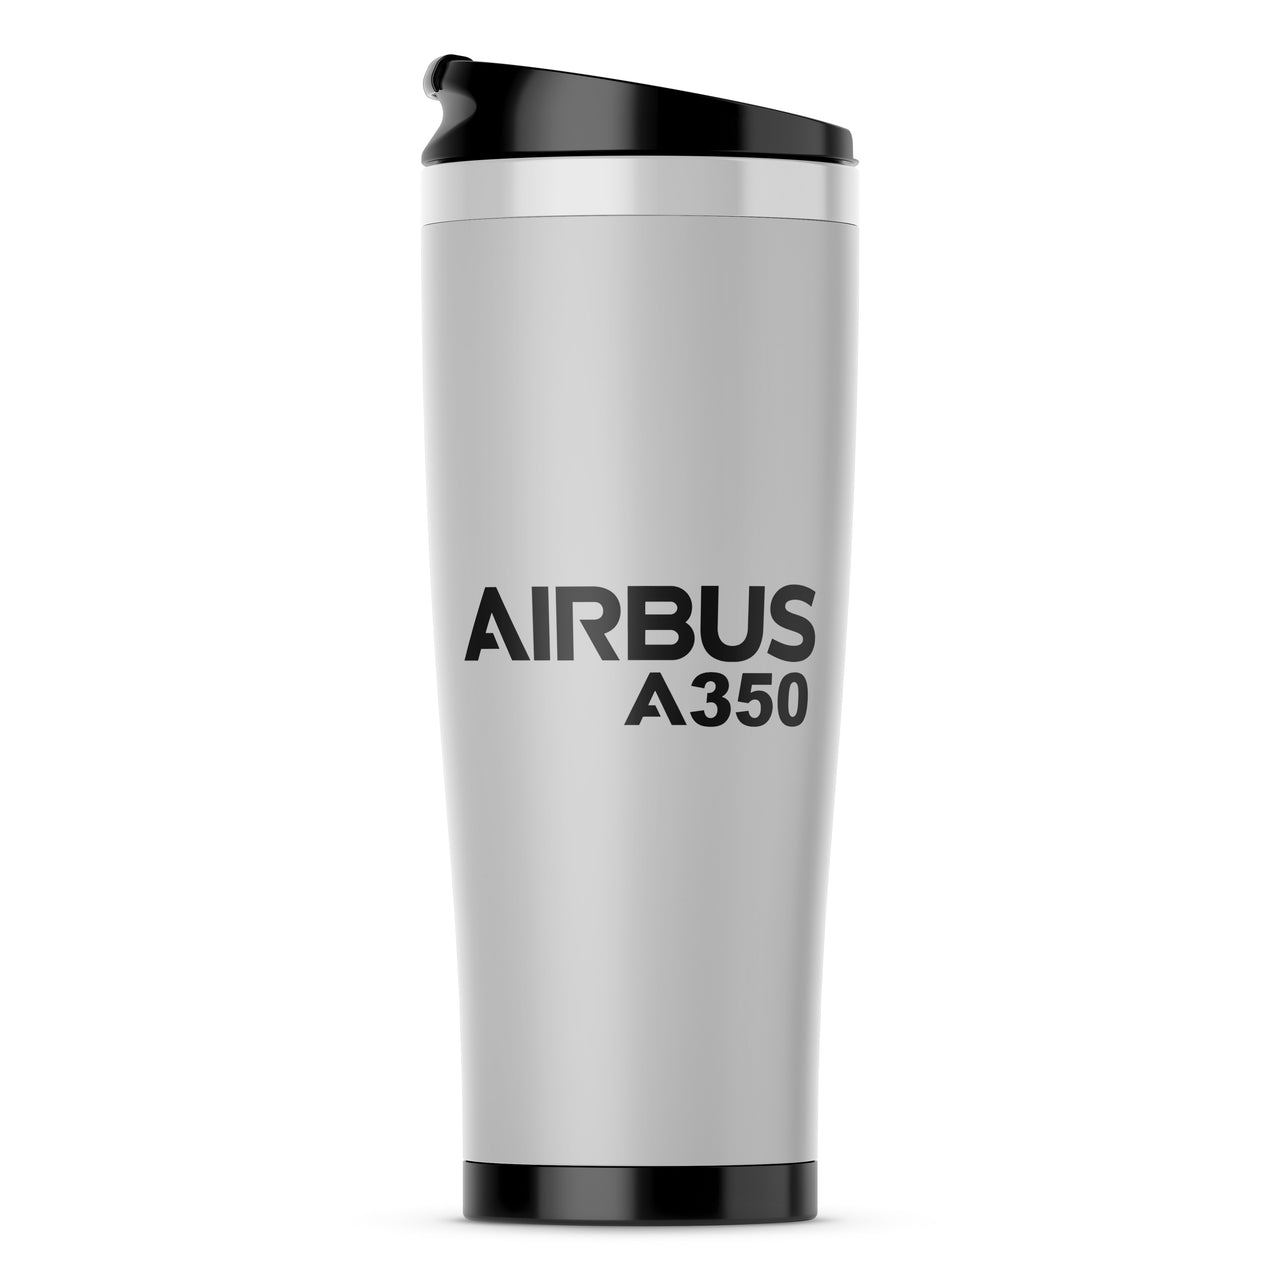 Airbus A350 & Text Designed Travel Mugs